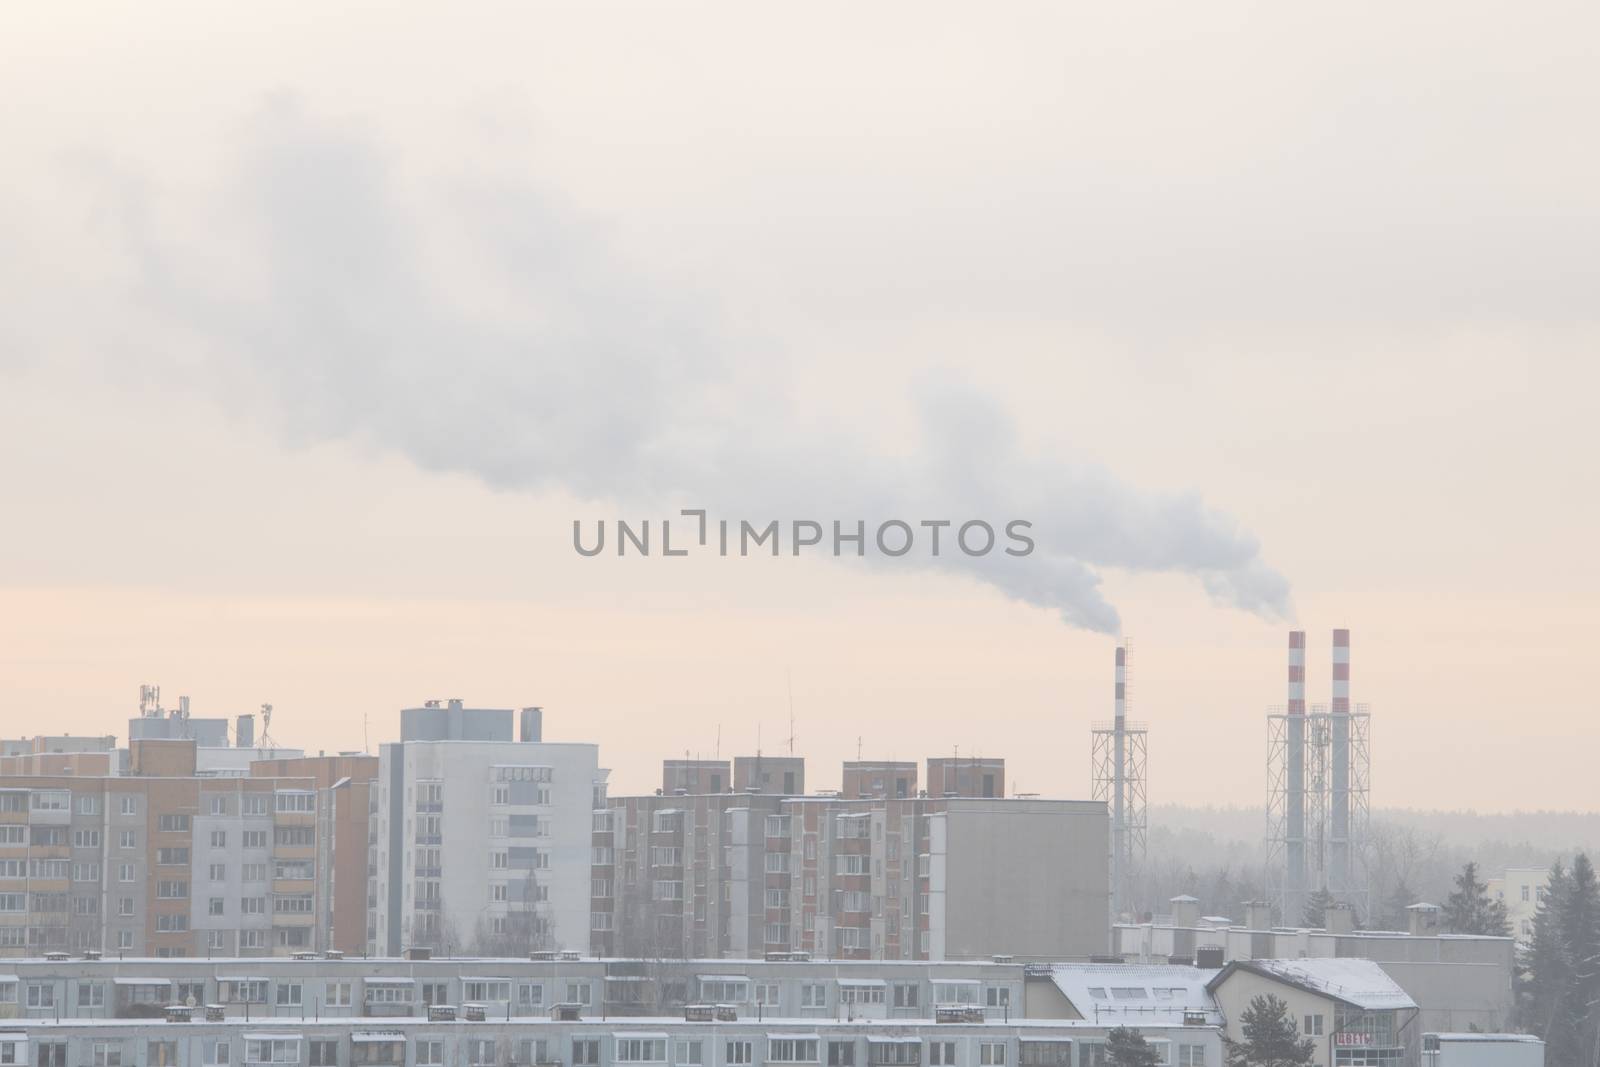 Smoking a pipe of heating plants supplying heat to the city.